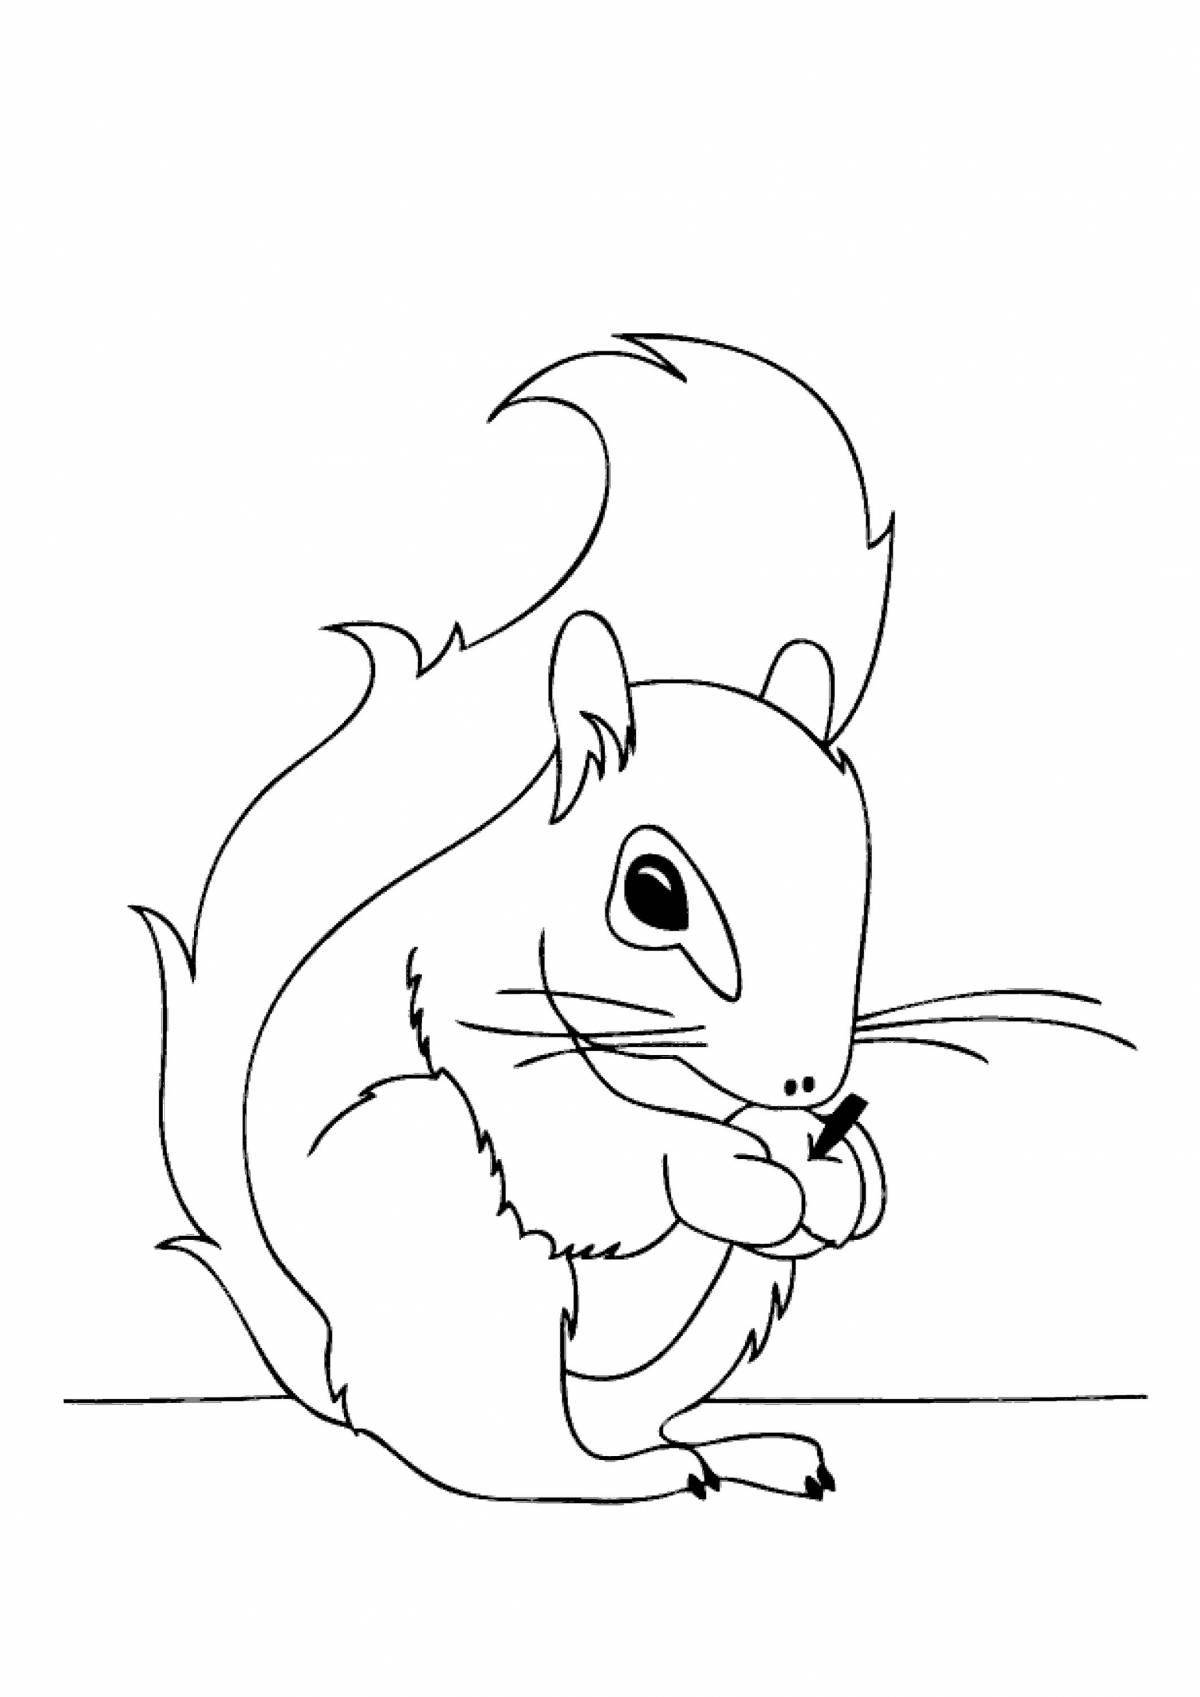 Coloring page playful squirrel